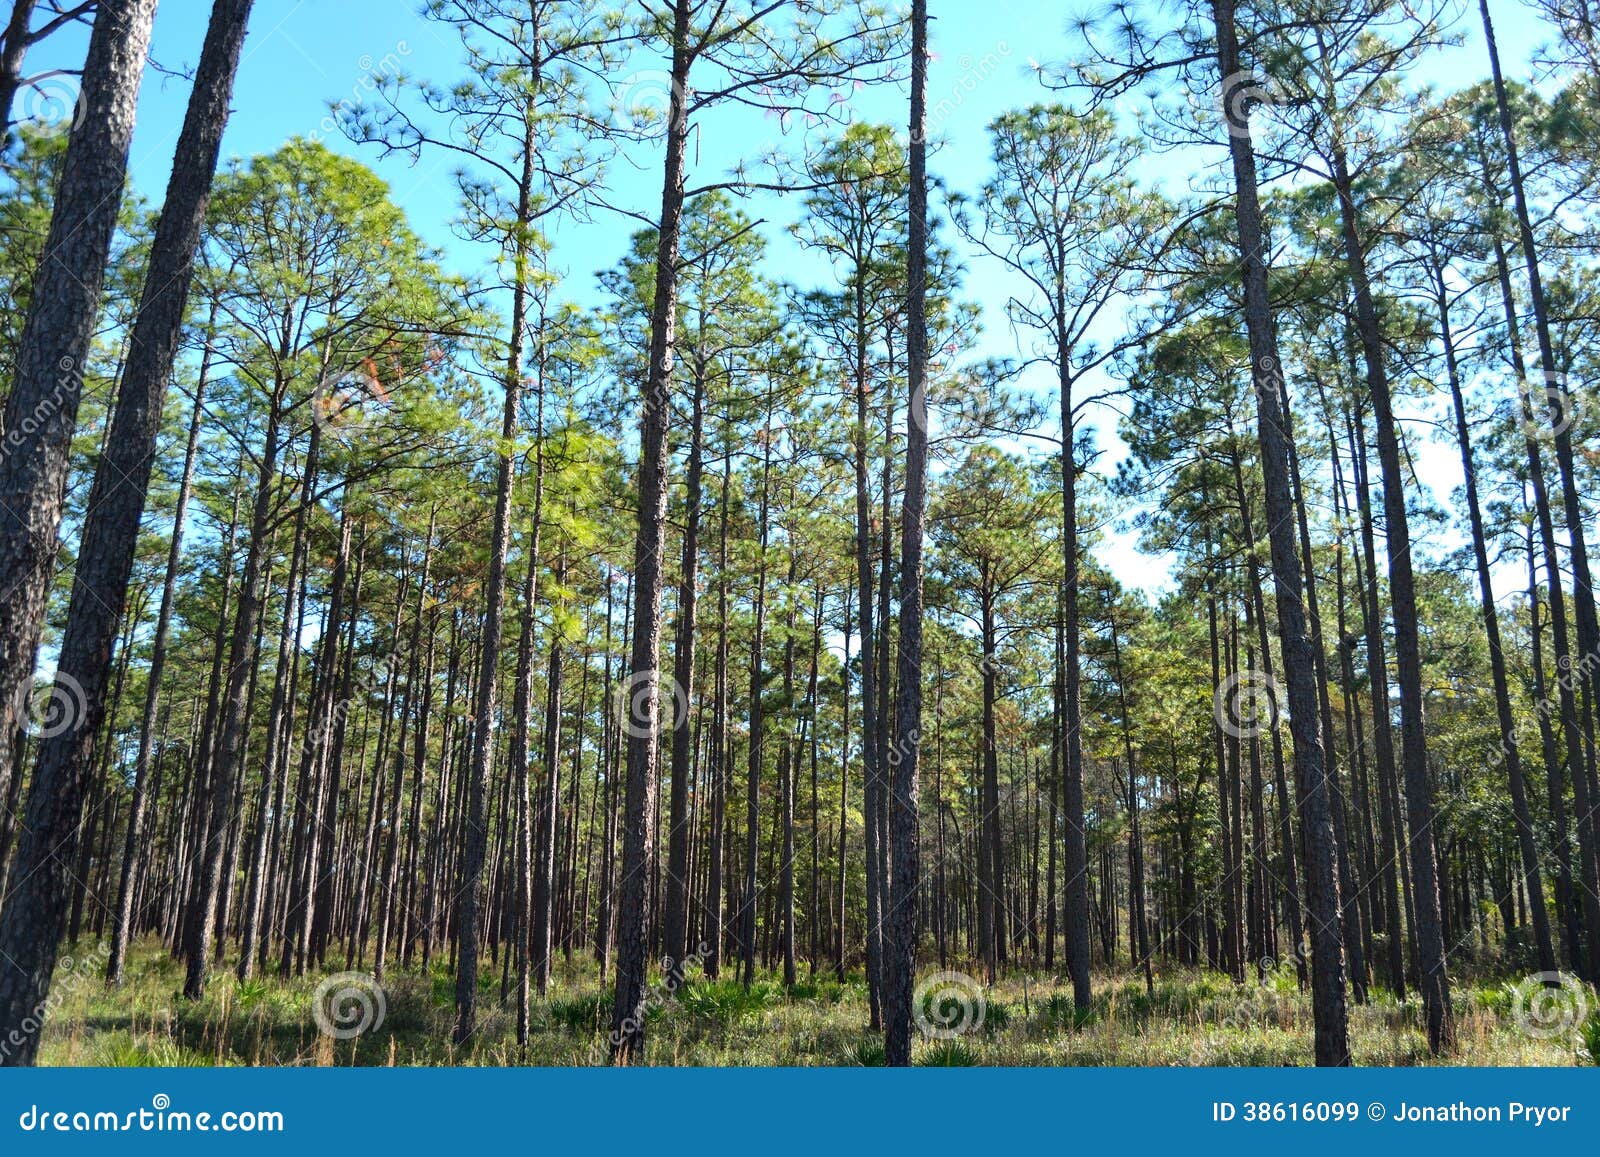 landscape planted pines on forestry land 2